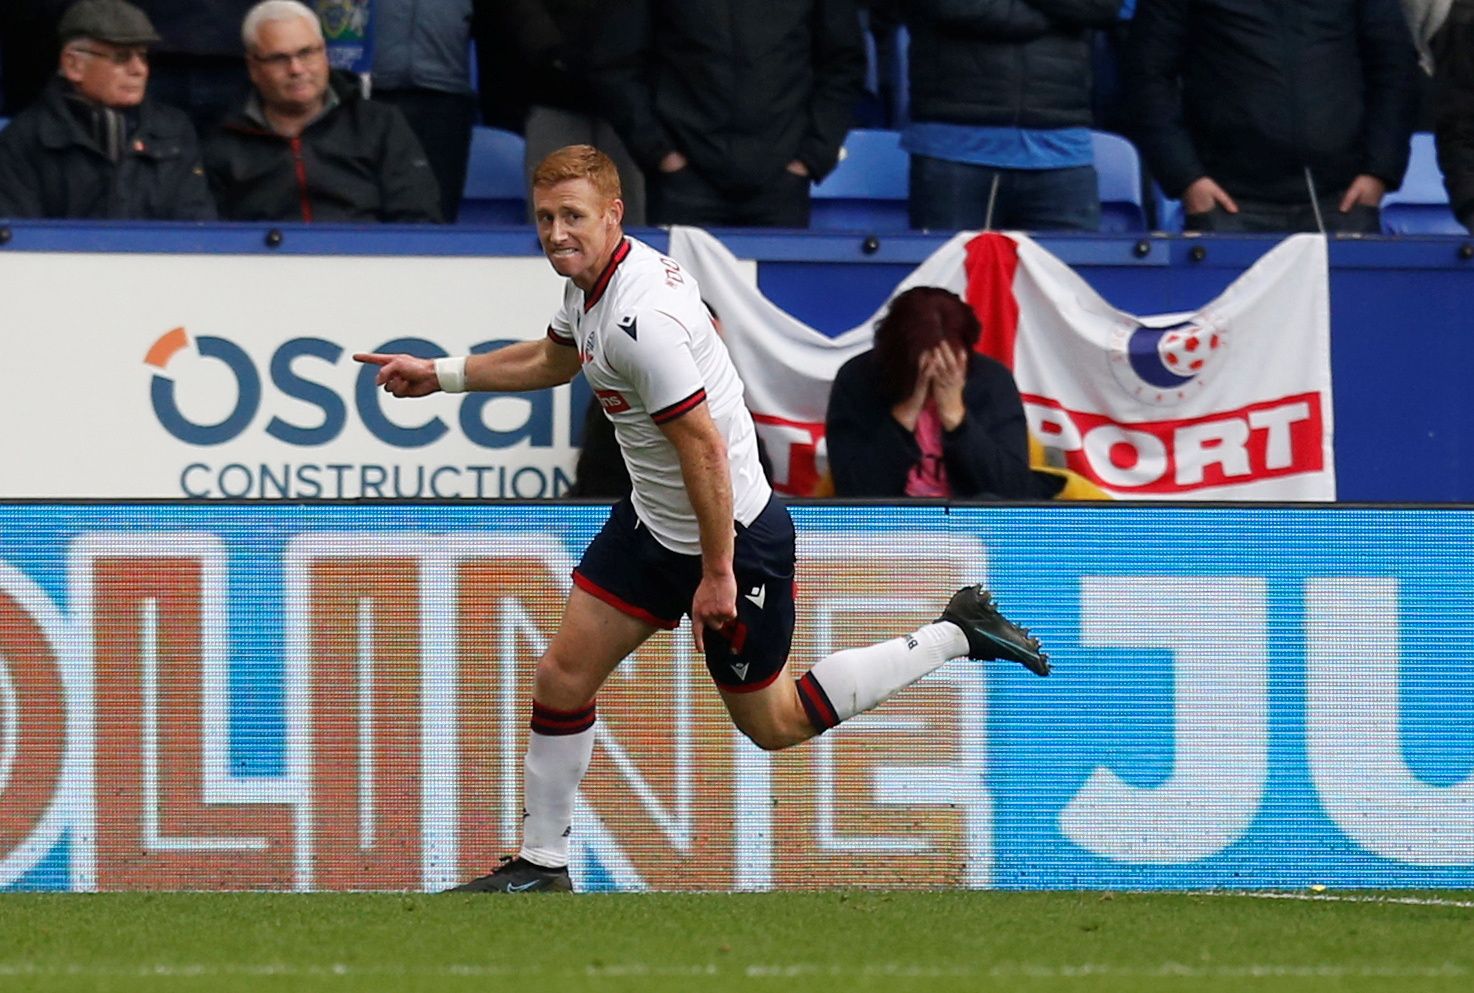 Soccer Football - FA Cup - First Round - Bolton Wanderers v Stockport County - University of Bolton Stadium, Bolton, Britain - November 7, 2021 Bolton Wanderers' Eoin Doyle celebrates scoring their first goal